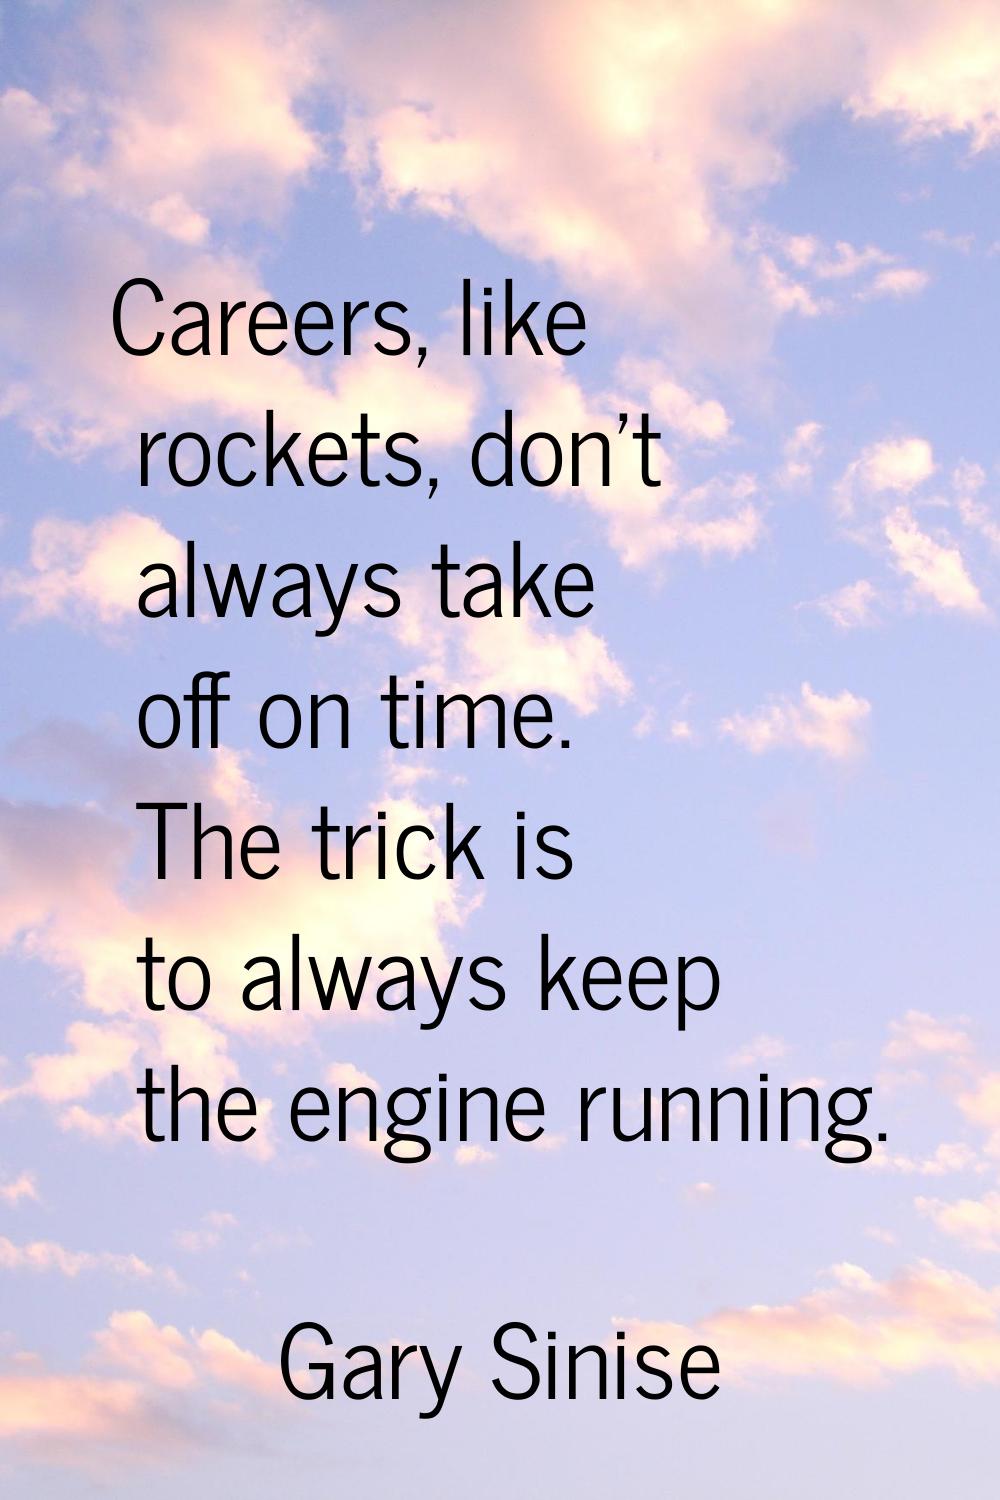 Careers, like rockets, don't always take off on time. The trick is to always keep the engine runnin